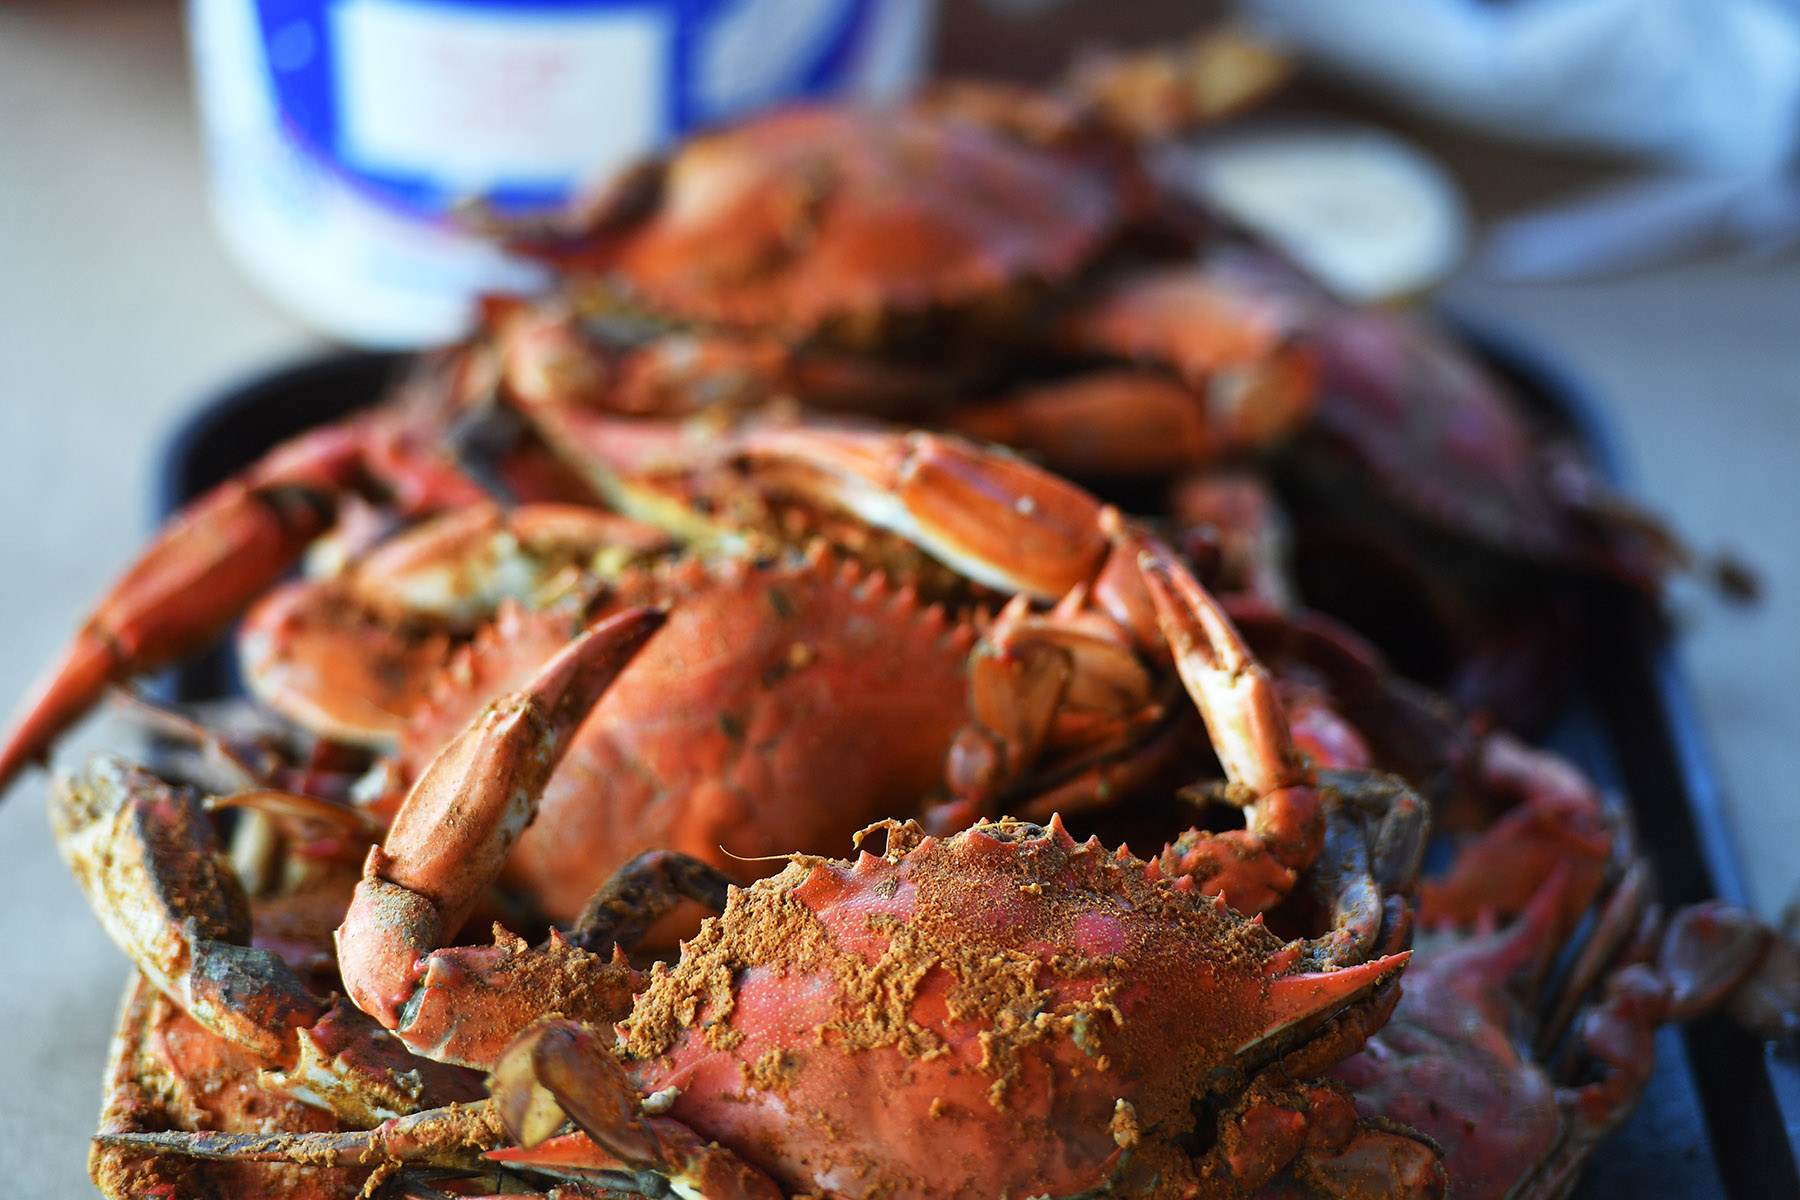 Customers have enjoyed decades of blue crabs and seafood at the popular Harris Crab House in Grasonville, MD